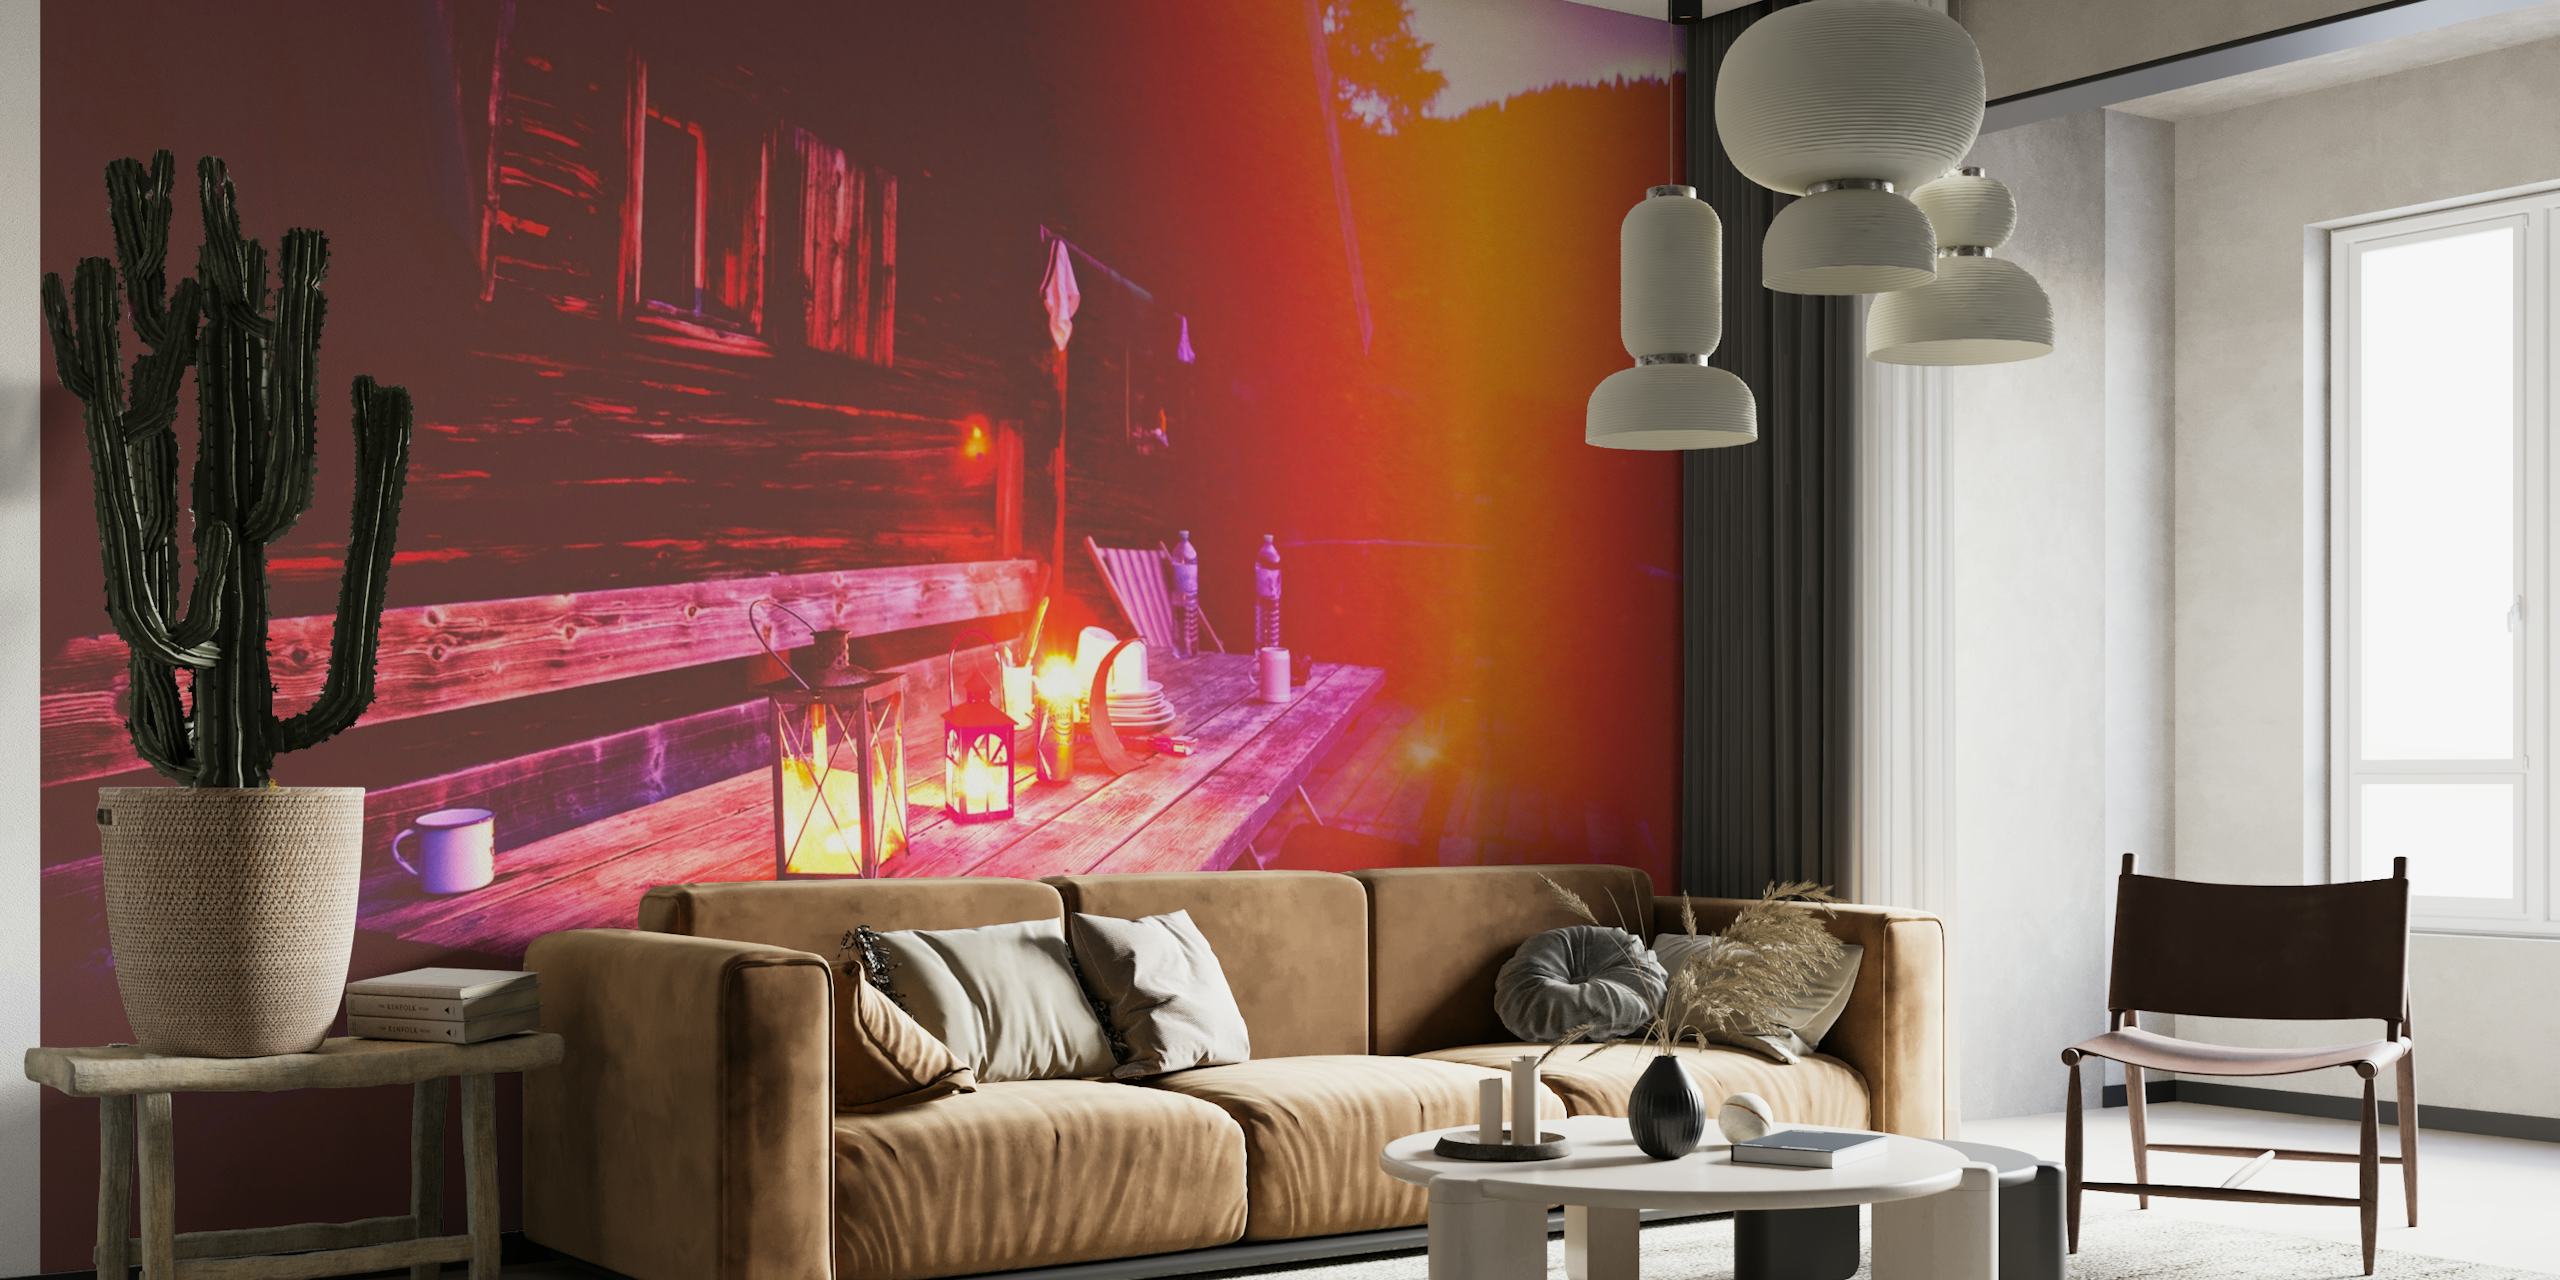 Wall mural of a serene lakeside house during sunset with warm amber tones